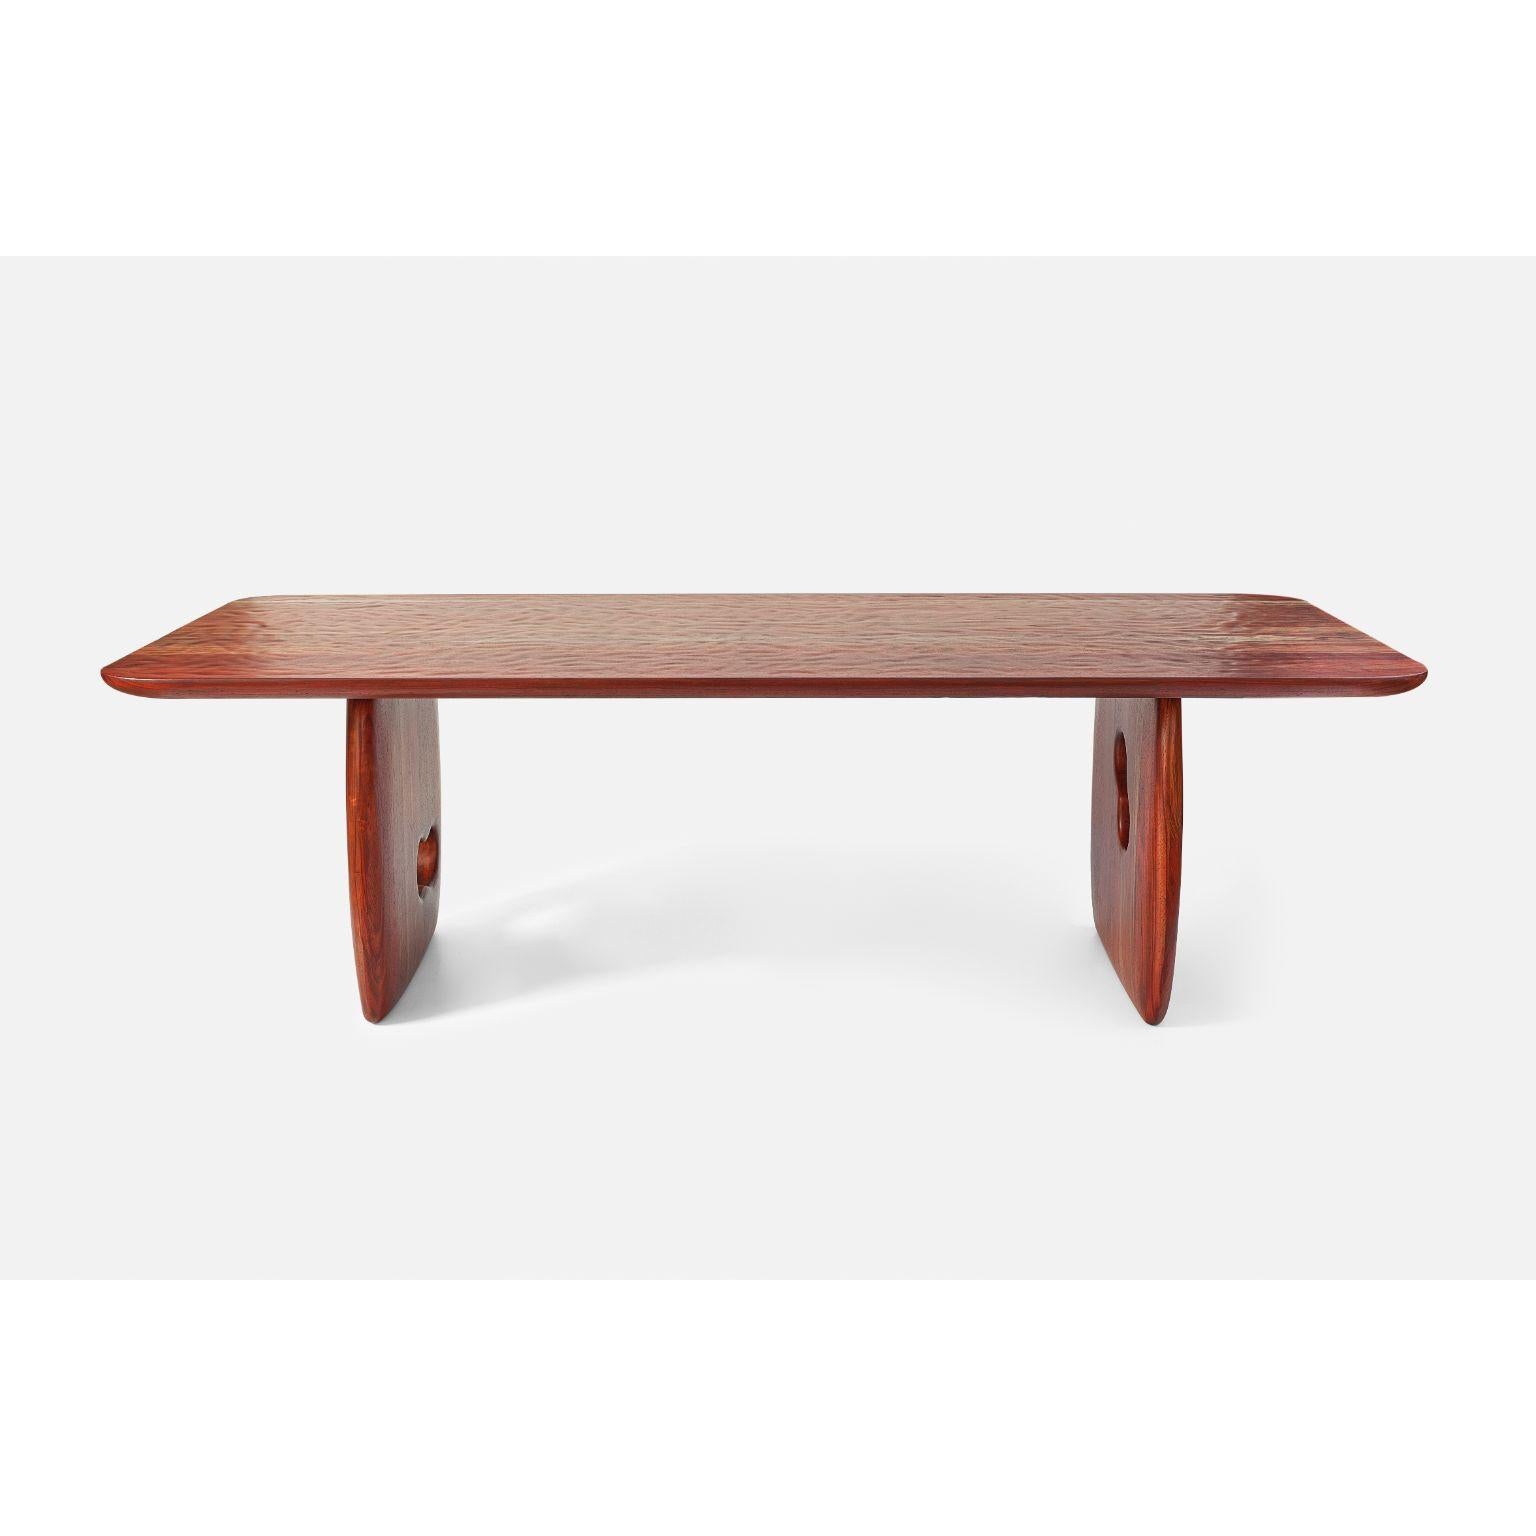 Gauras Dining Table L by Contemporary Ecowood
Dimensions: W 120 x D 300 x H 75 cm.
Materials: African Rosewood.
Color: Natural

Contemporary Ecowood’s story began in a craft workshop in 2009. Our wood passion made us focus on fallen trees in the